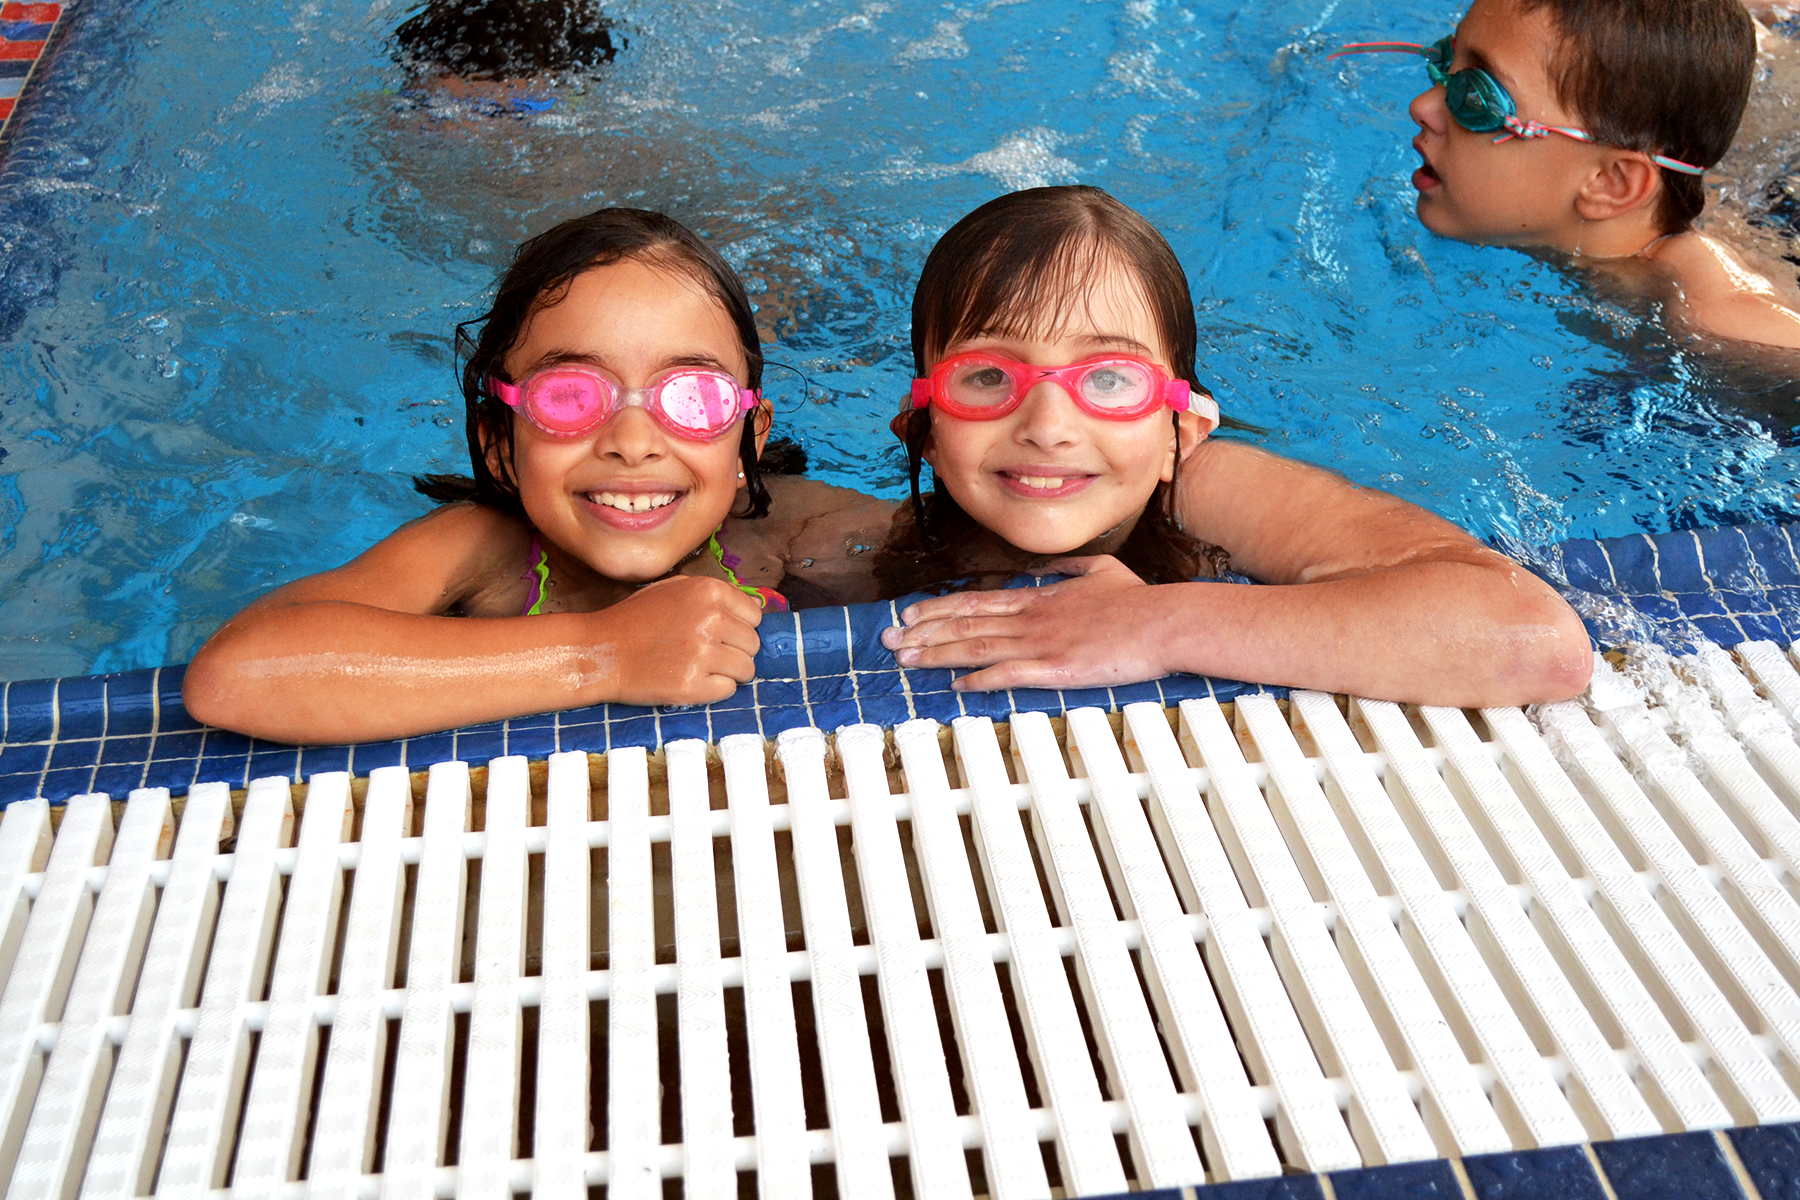 ${ Two young children wearing swim goggles and smiling while holding onto the side of the pool }